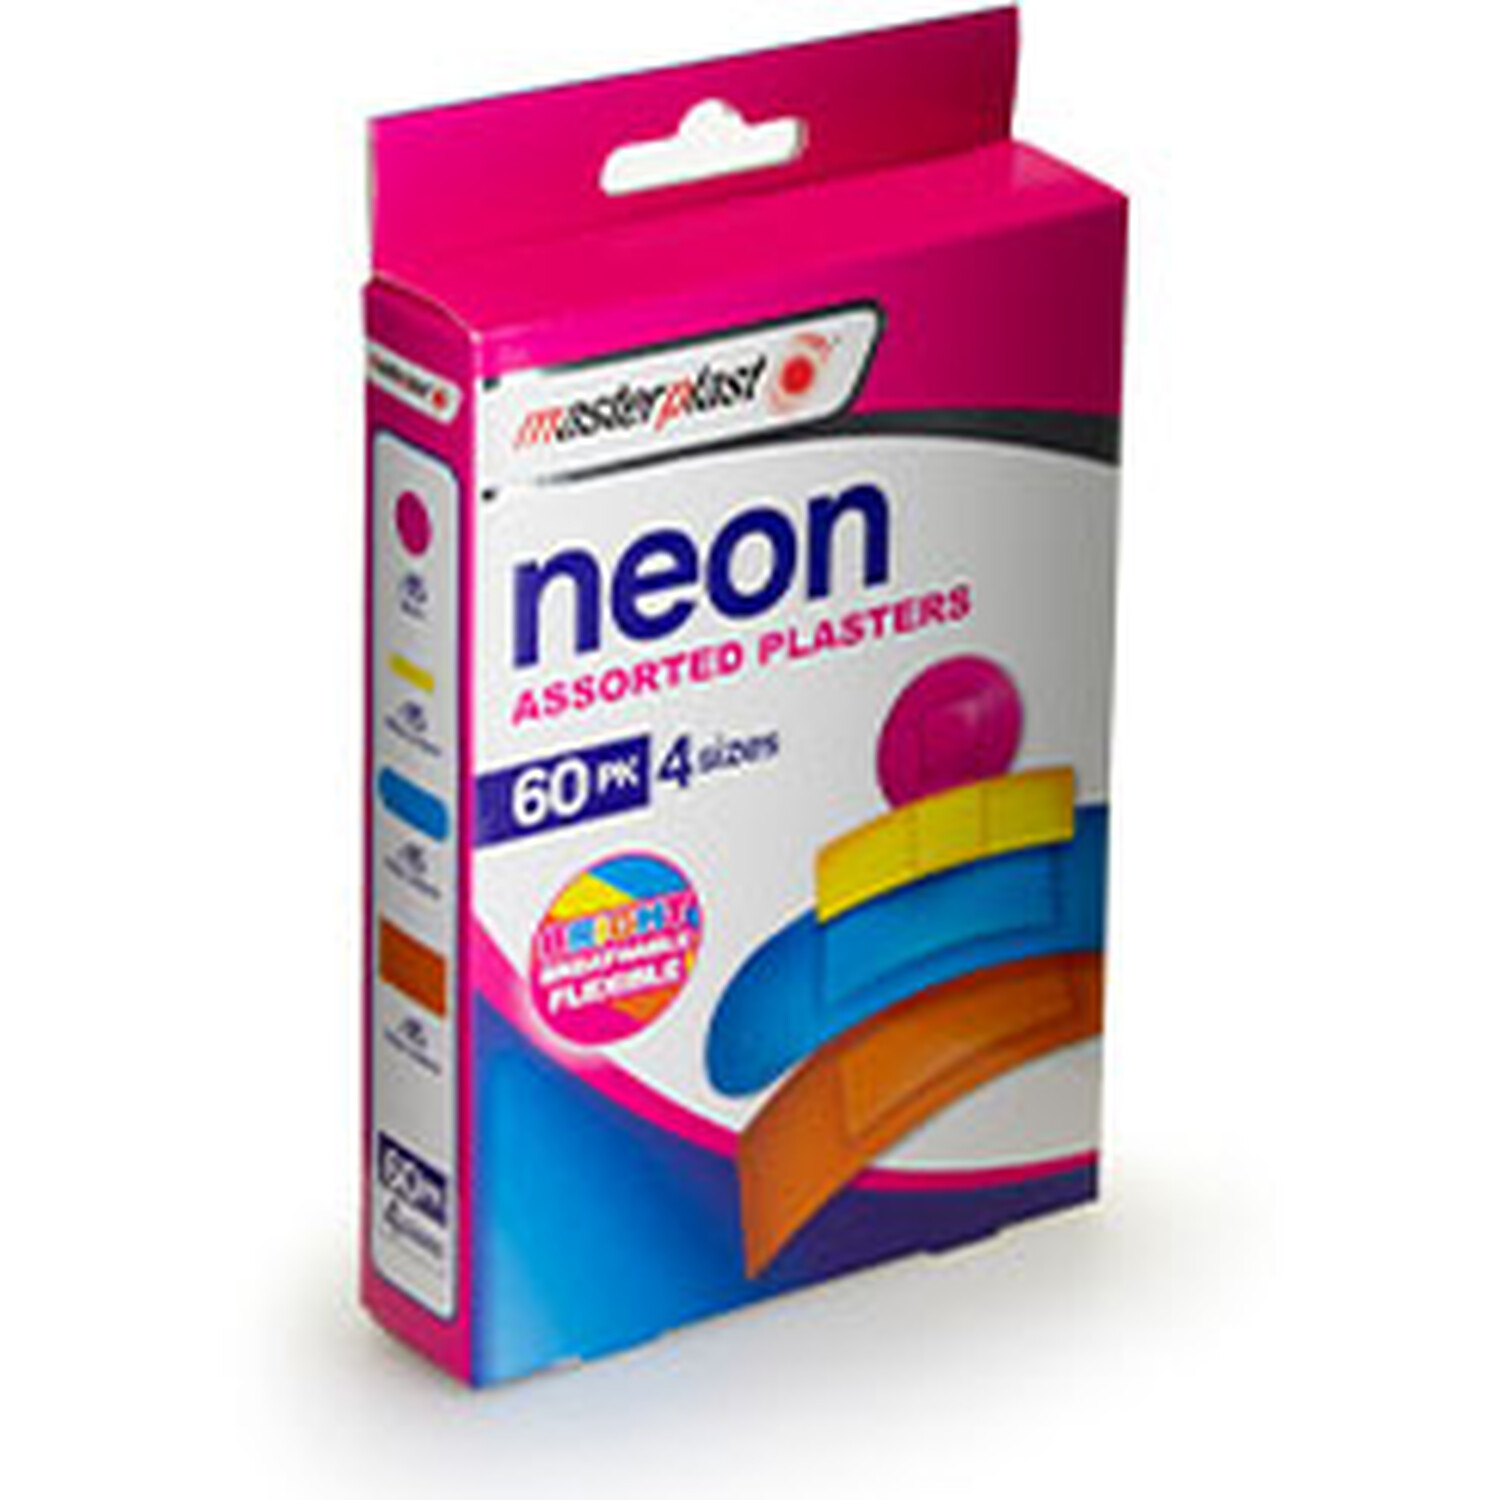 Pack of 60 Neon Assorted Plasters Image